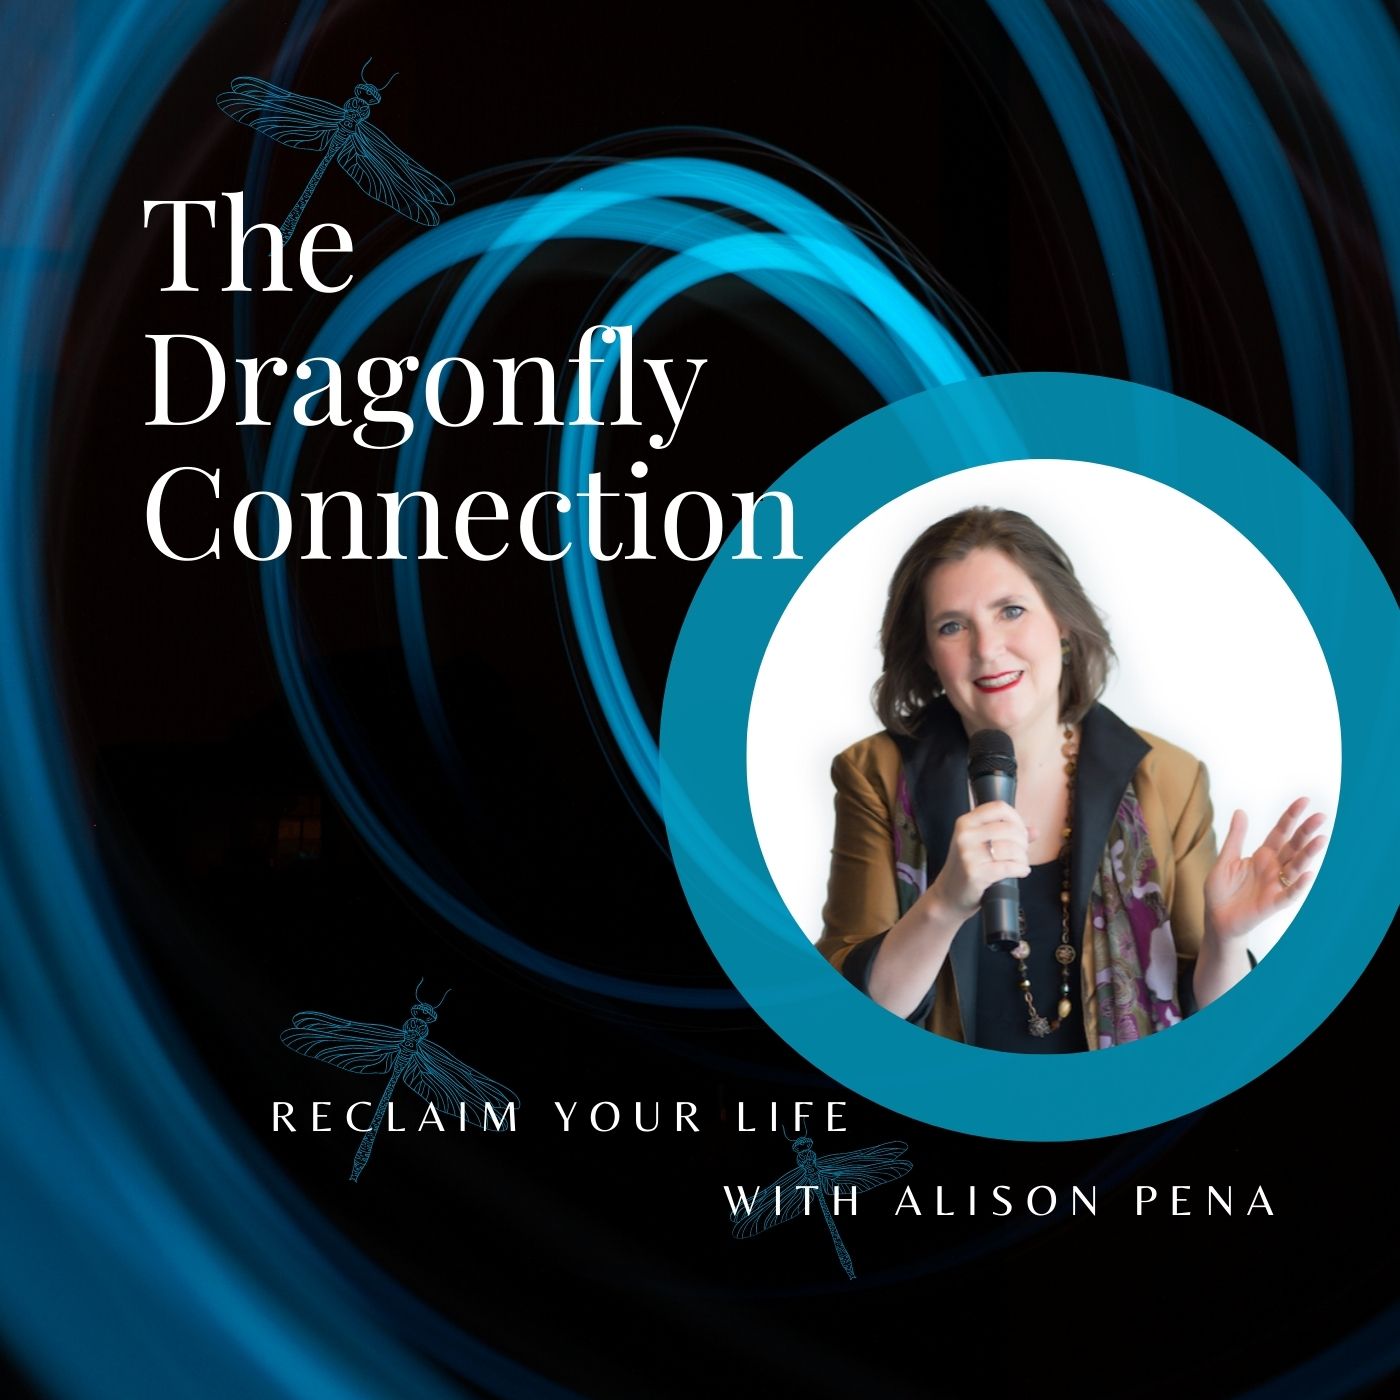 Reclaiming Your Life with Alison Pena